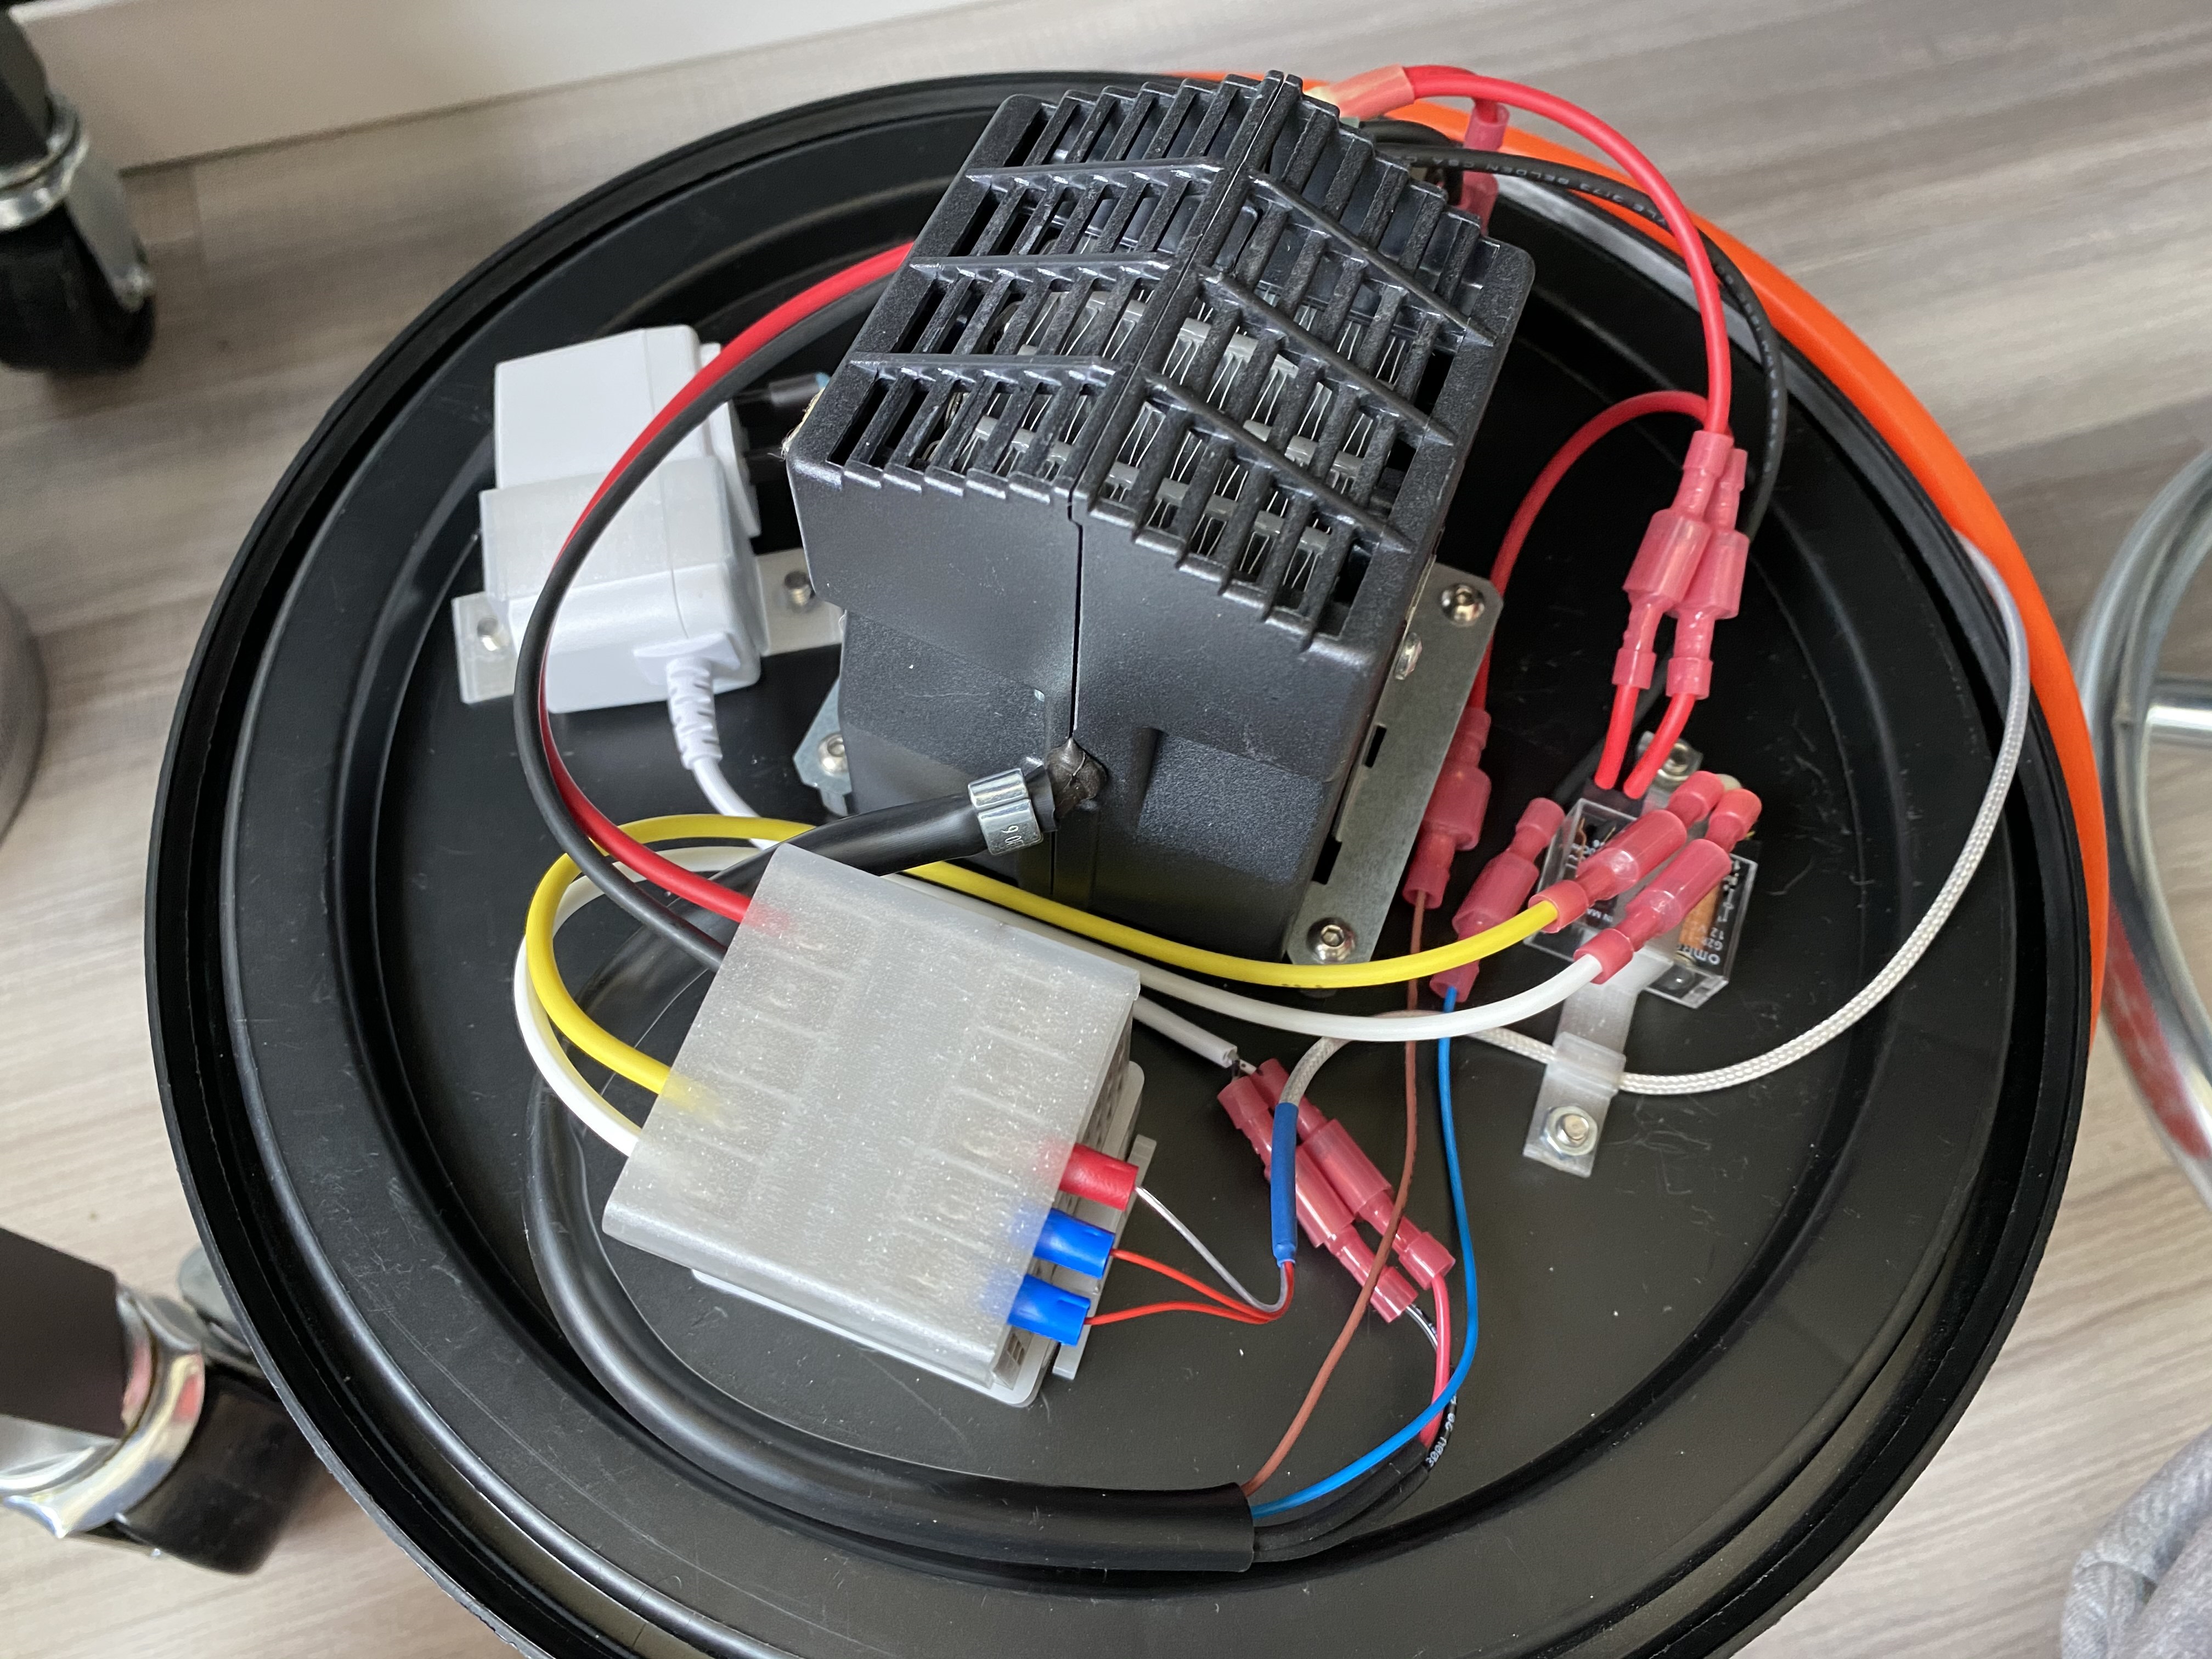 A 'Smart' Filament Dry Box which uses heat generated by the PC to